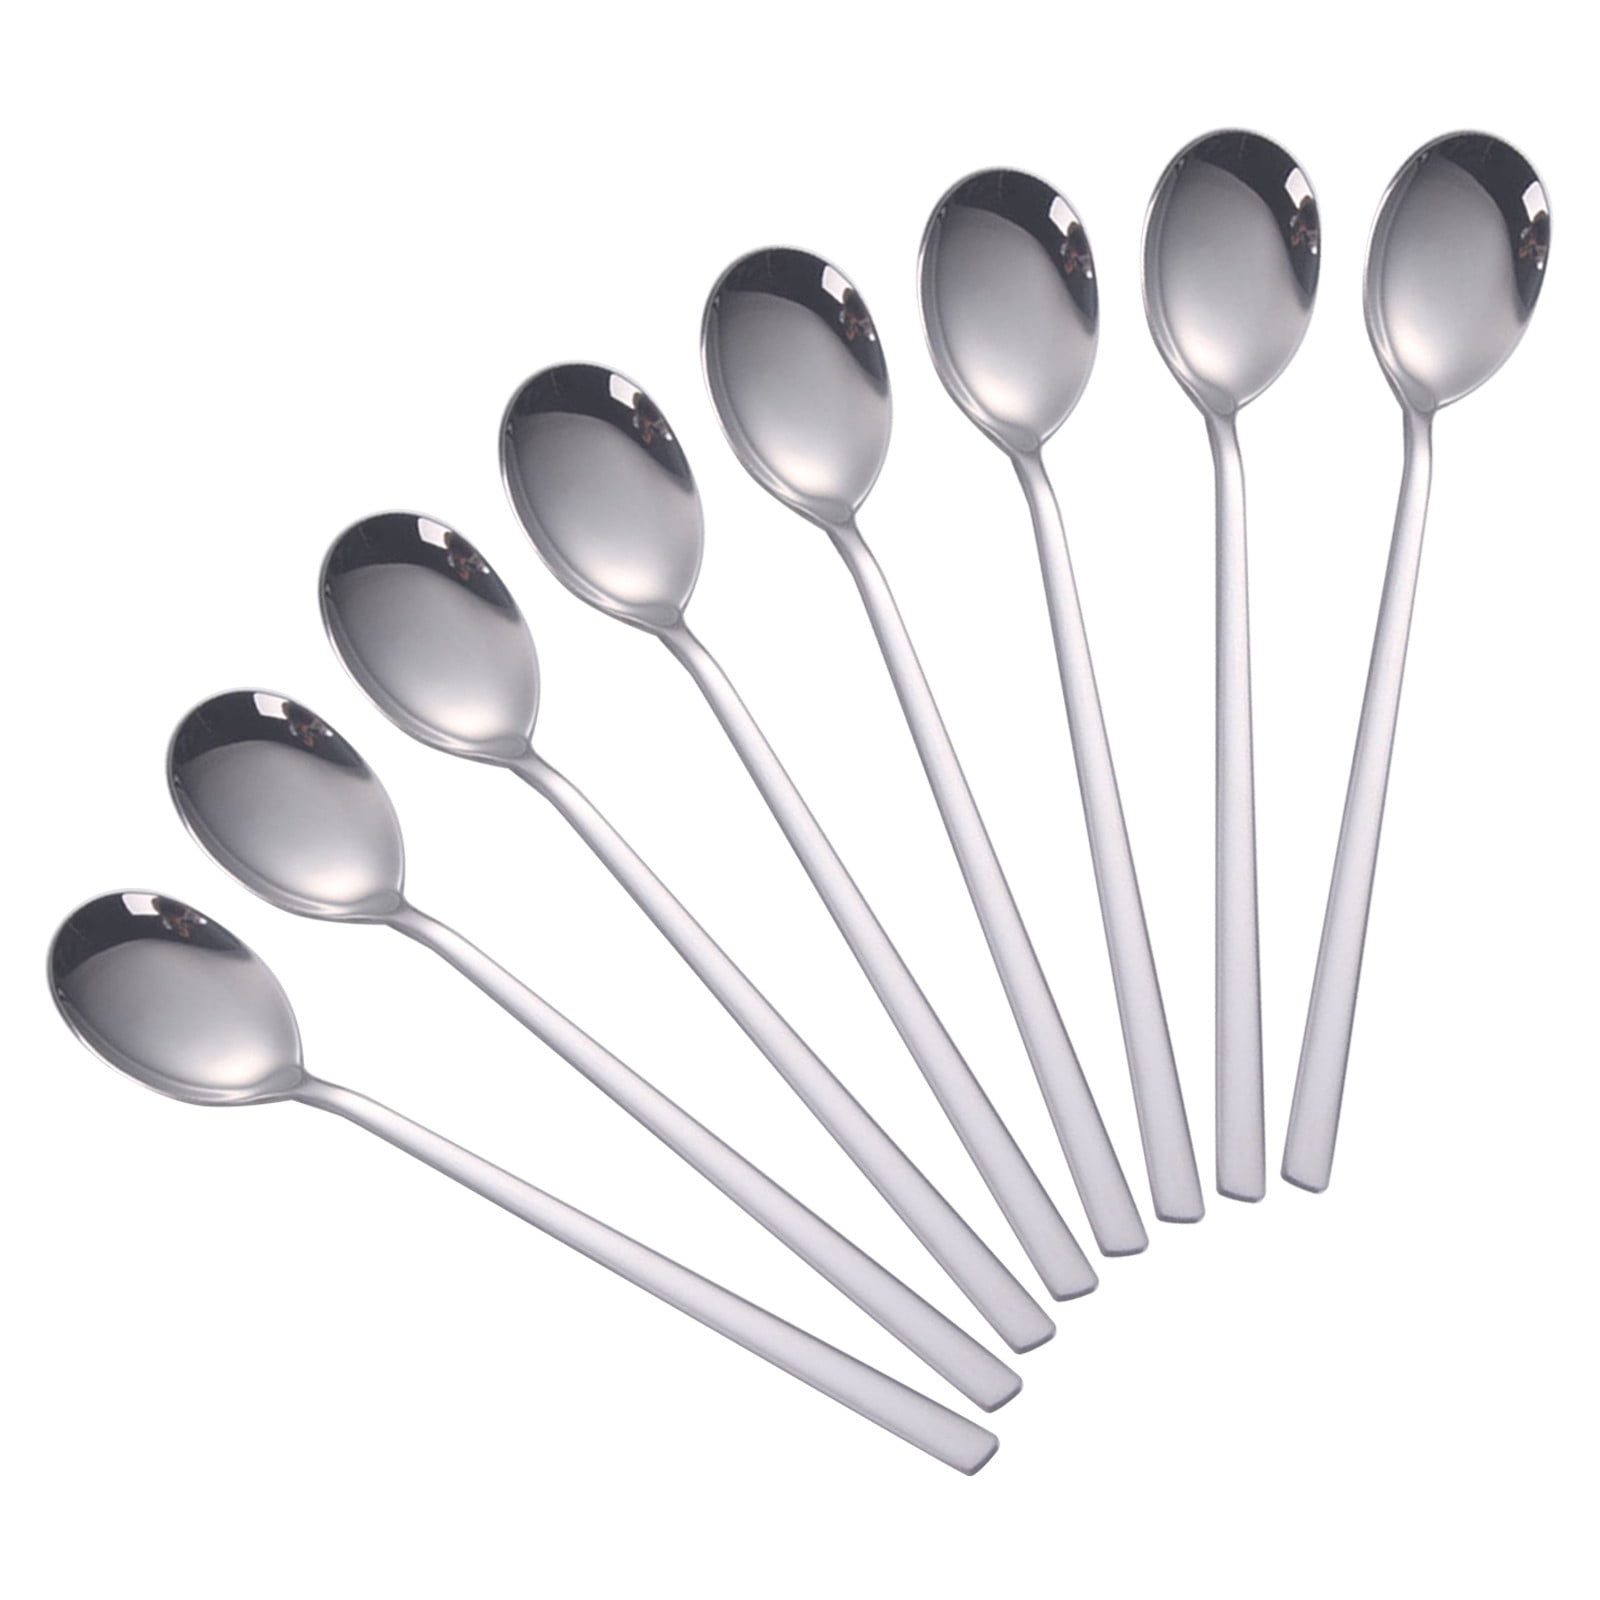 12 PRIMA SERVING/TABLESPOONS 8.5" HEAVY WEIGHT 18/0 S/S FREE SHIPPING USA ONLY 